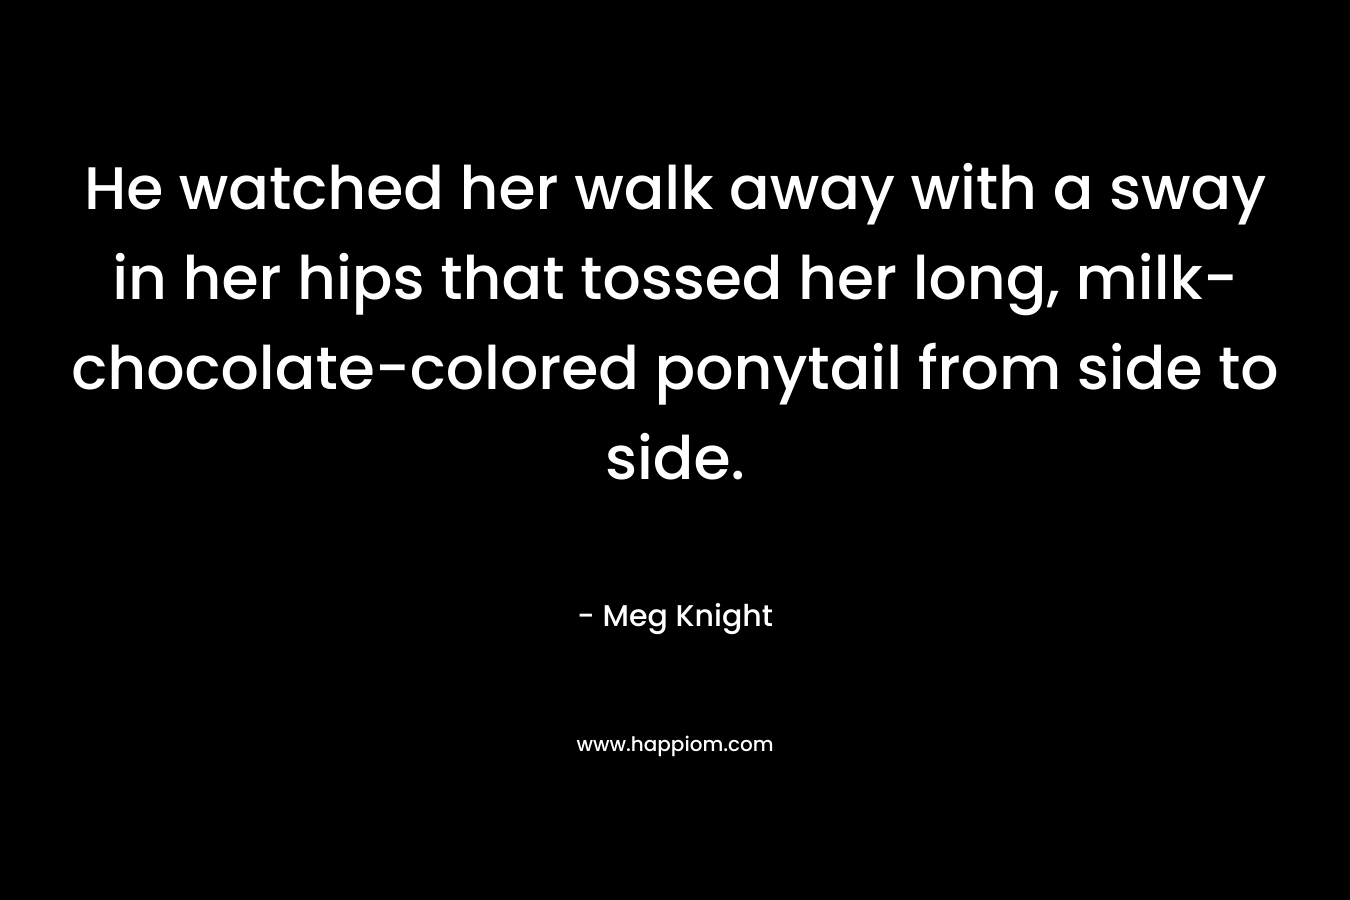 He watched her walk away with a sway in her hips that tossed her long, milk-chocolate-colored ponytail from side to side. – Meg Knight